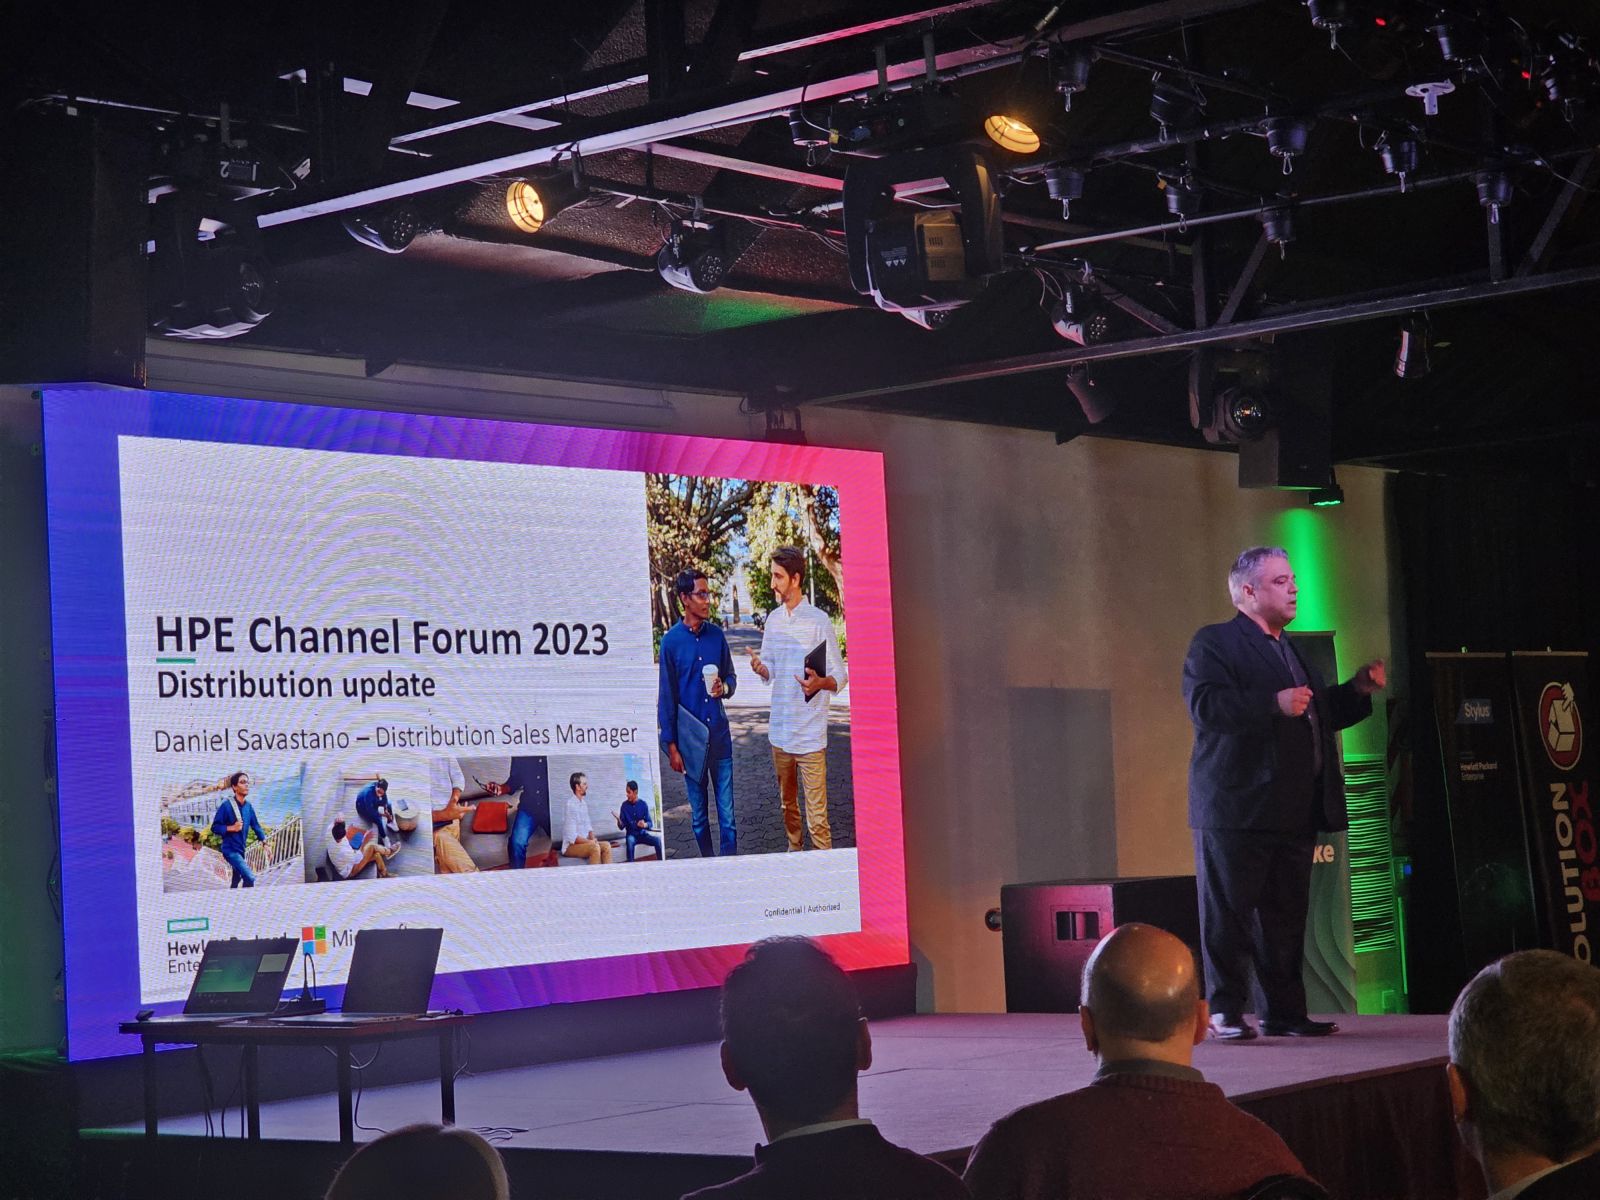 HPE Channel Forum 2023